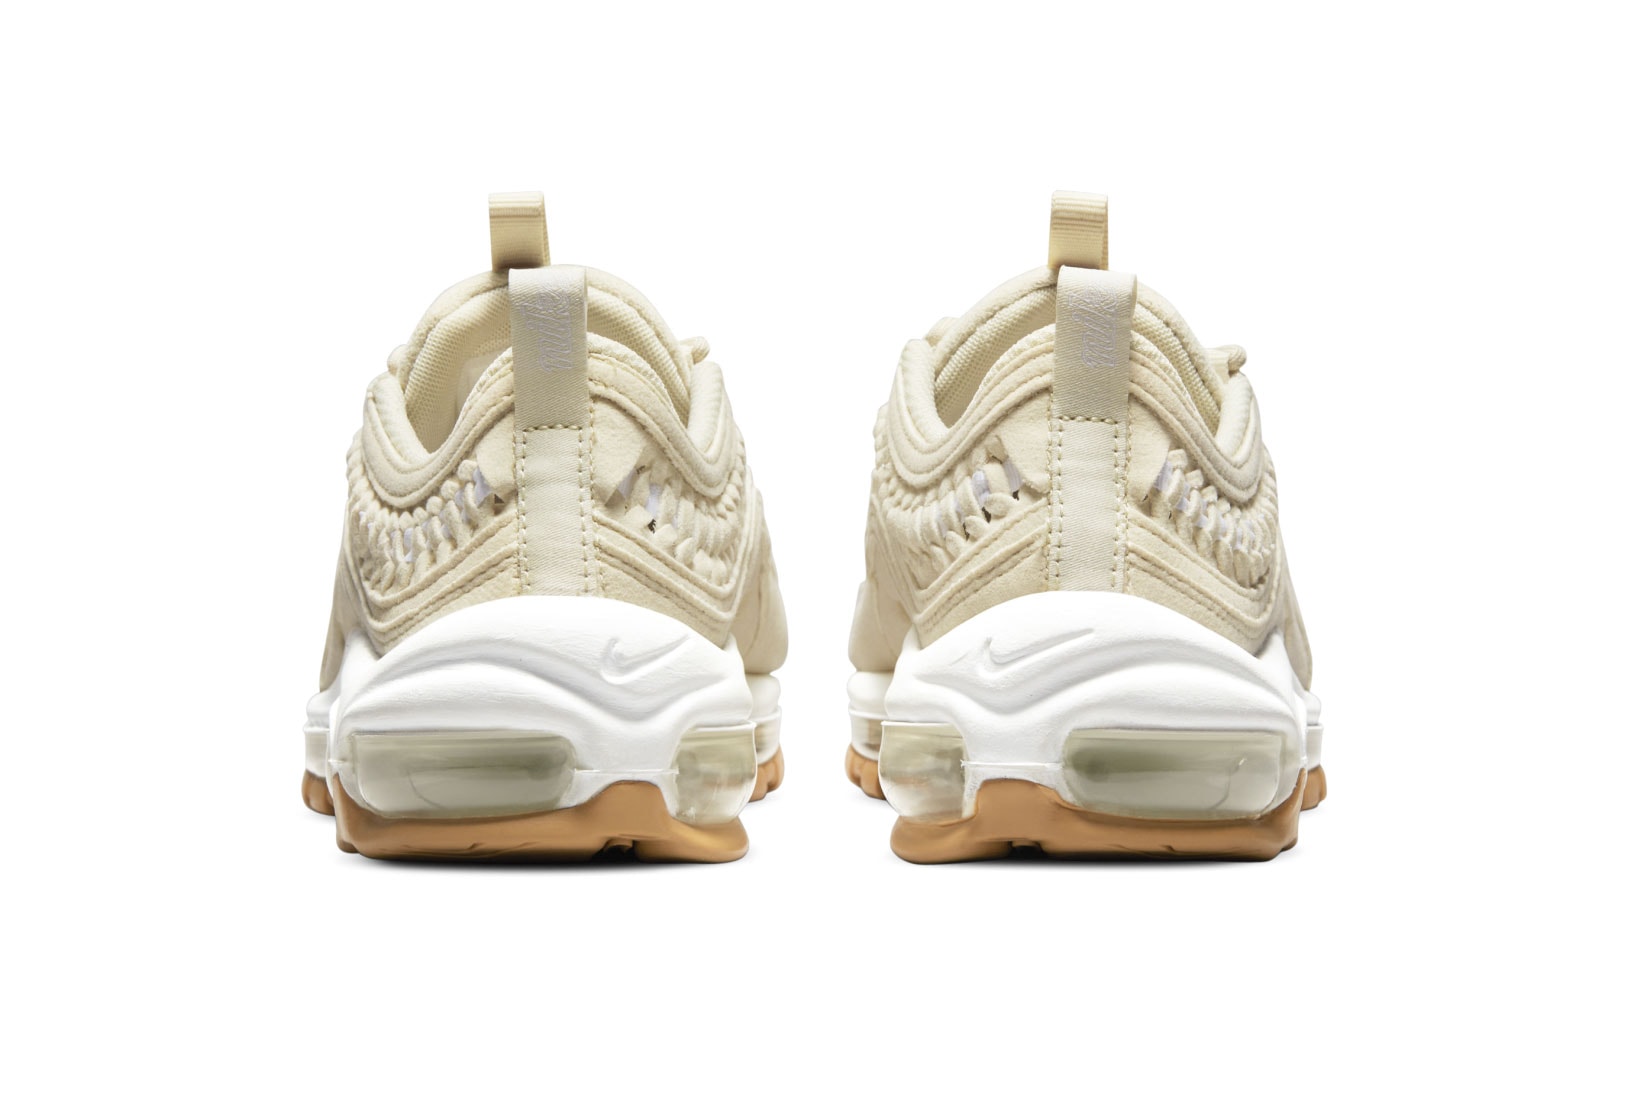 Nike Air Max 97 AM97 LX Woven Sneakers Heels Details